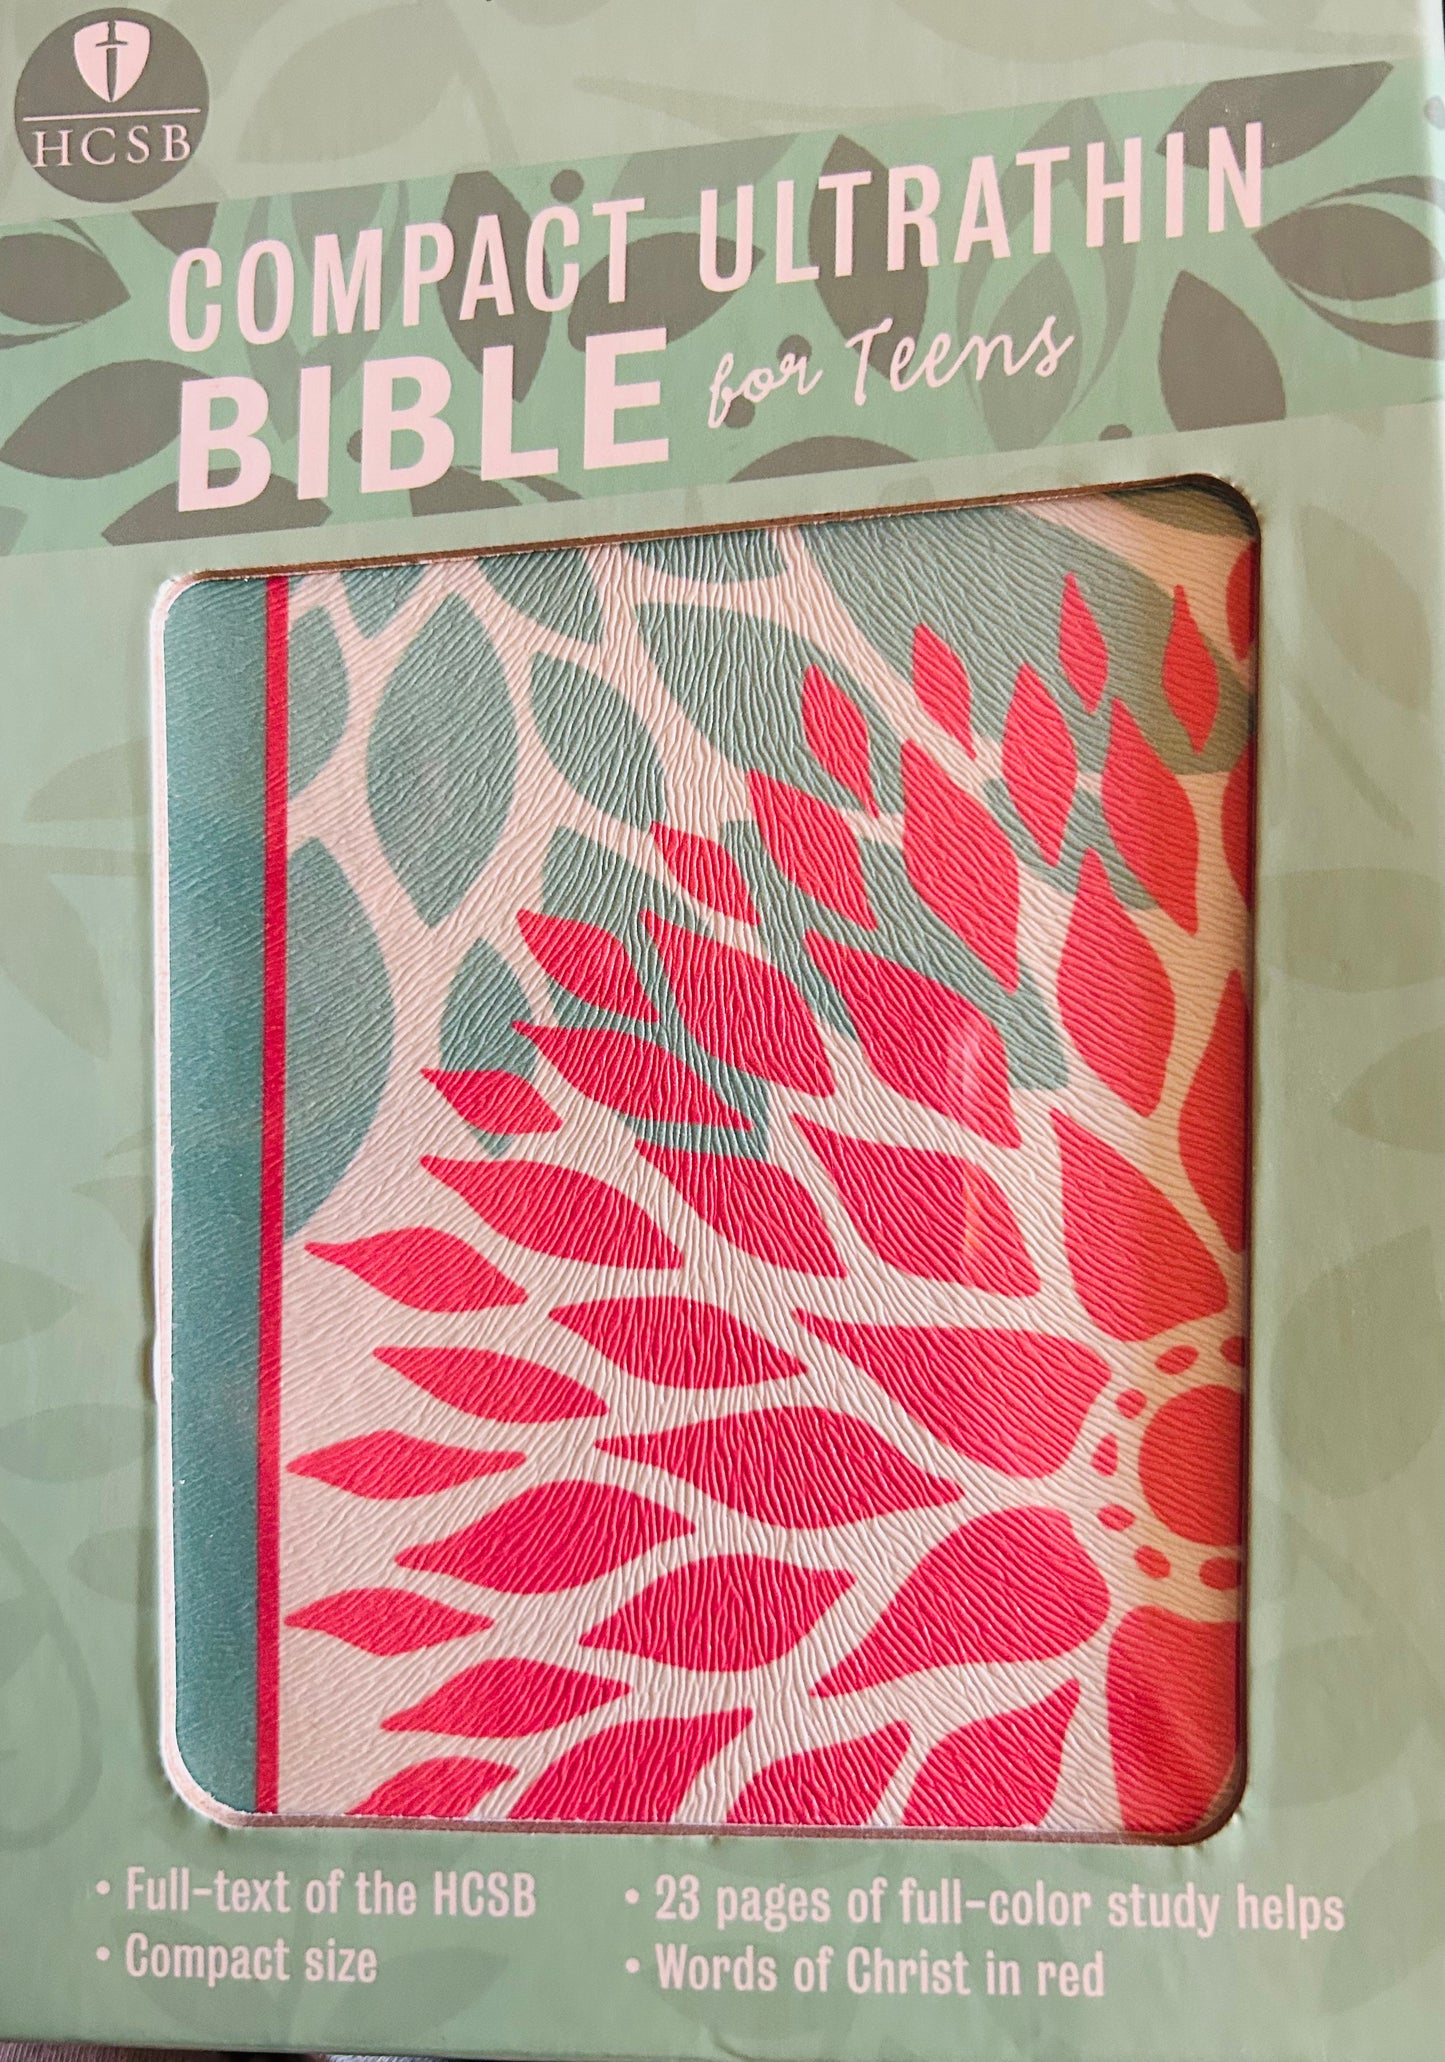 HCSB Compact UltraThin Bible for Teens